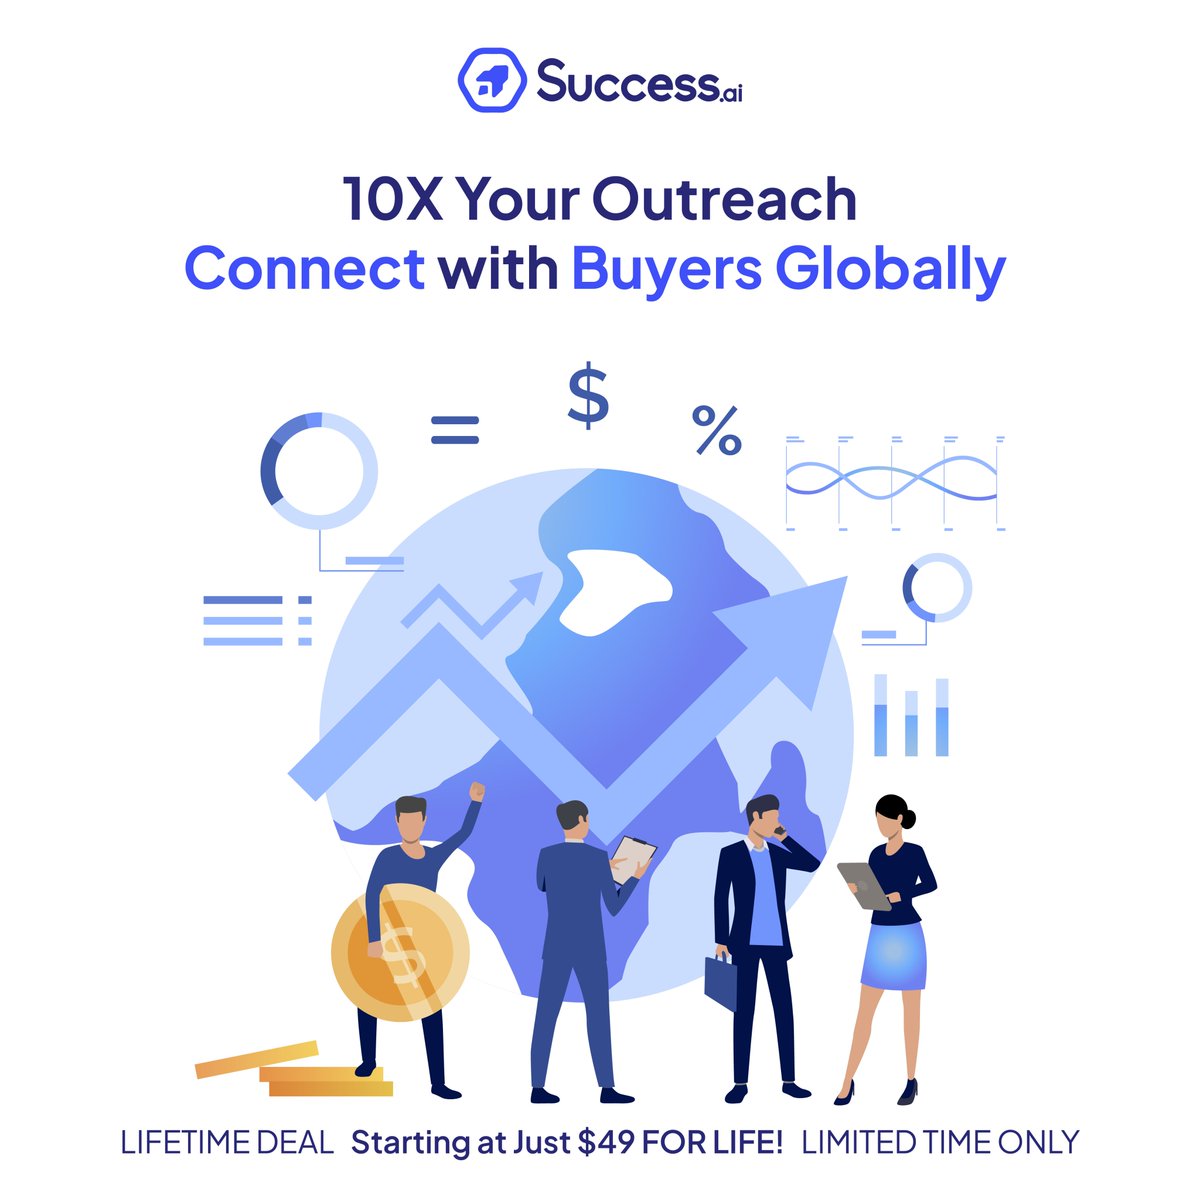 10X Your Outreach: Connect with Buyers Globally 

With Success.ai say goodbye to missed opportunities and hello to boundless connections, all while keeping your budget intact.

#ReachTheWorld #UnleashPotential